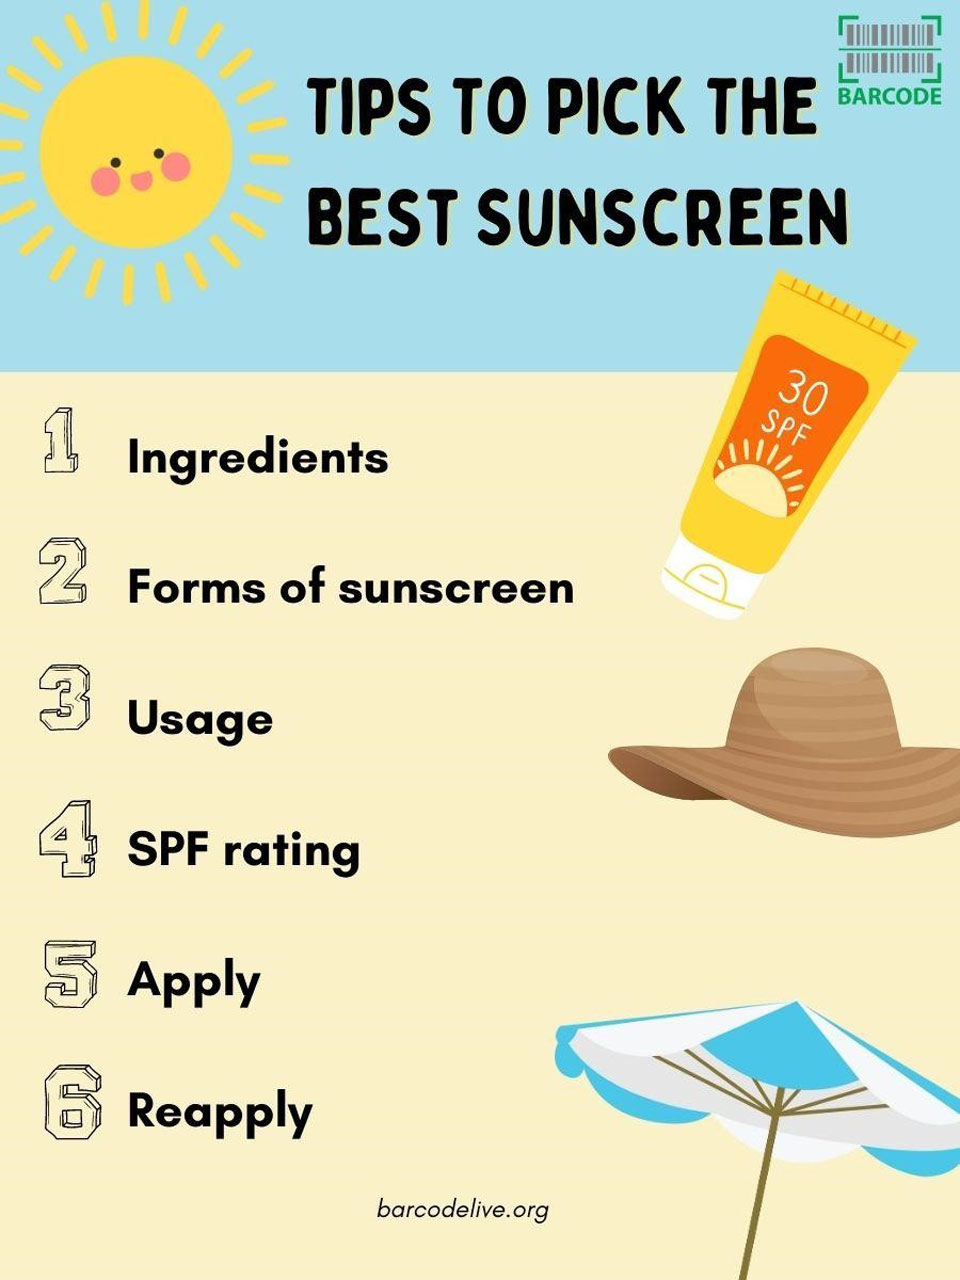 Tips to decide which type of sunscreen to use